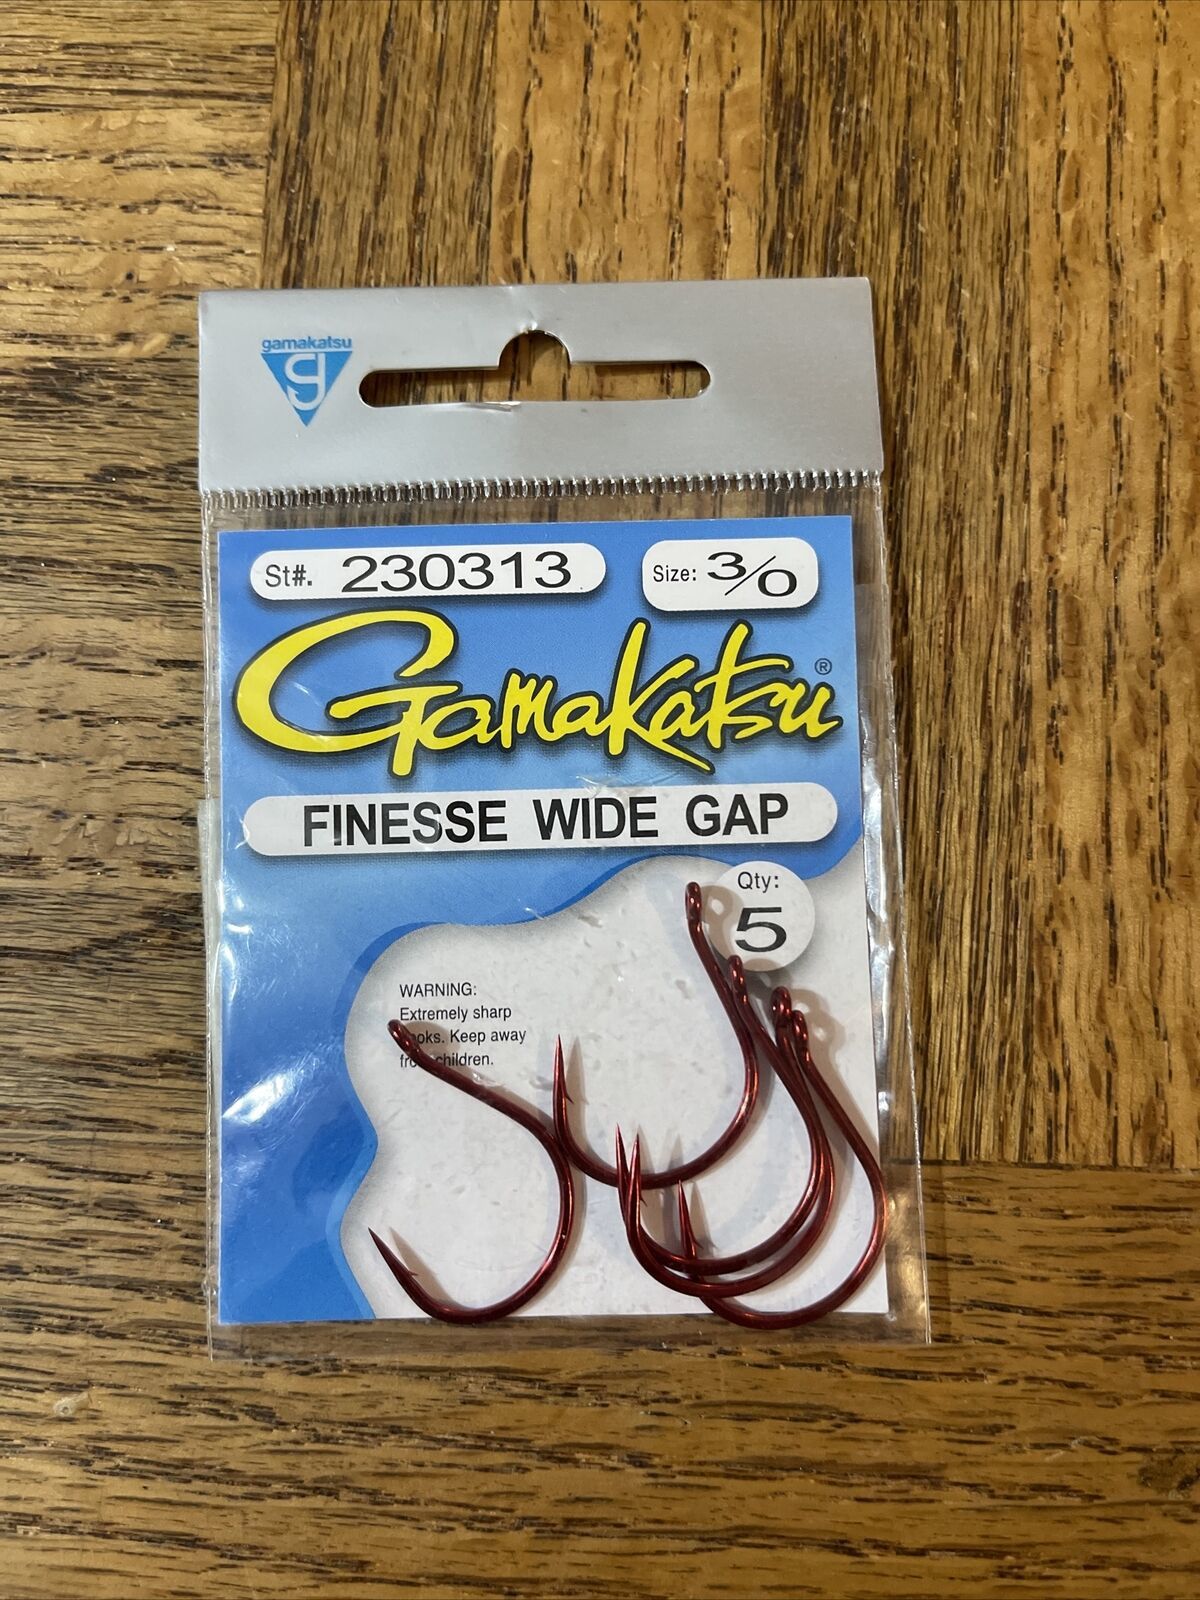 Primary image for Gamakatsu Finesse Wide Gap Hook Size 3/0